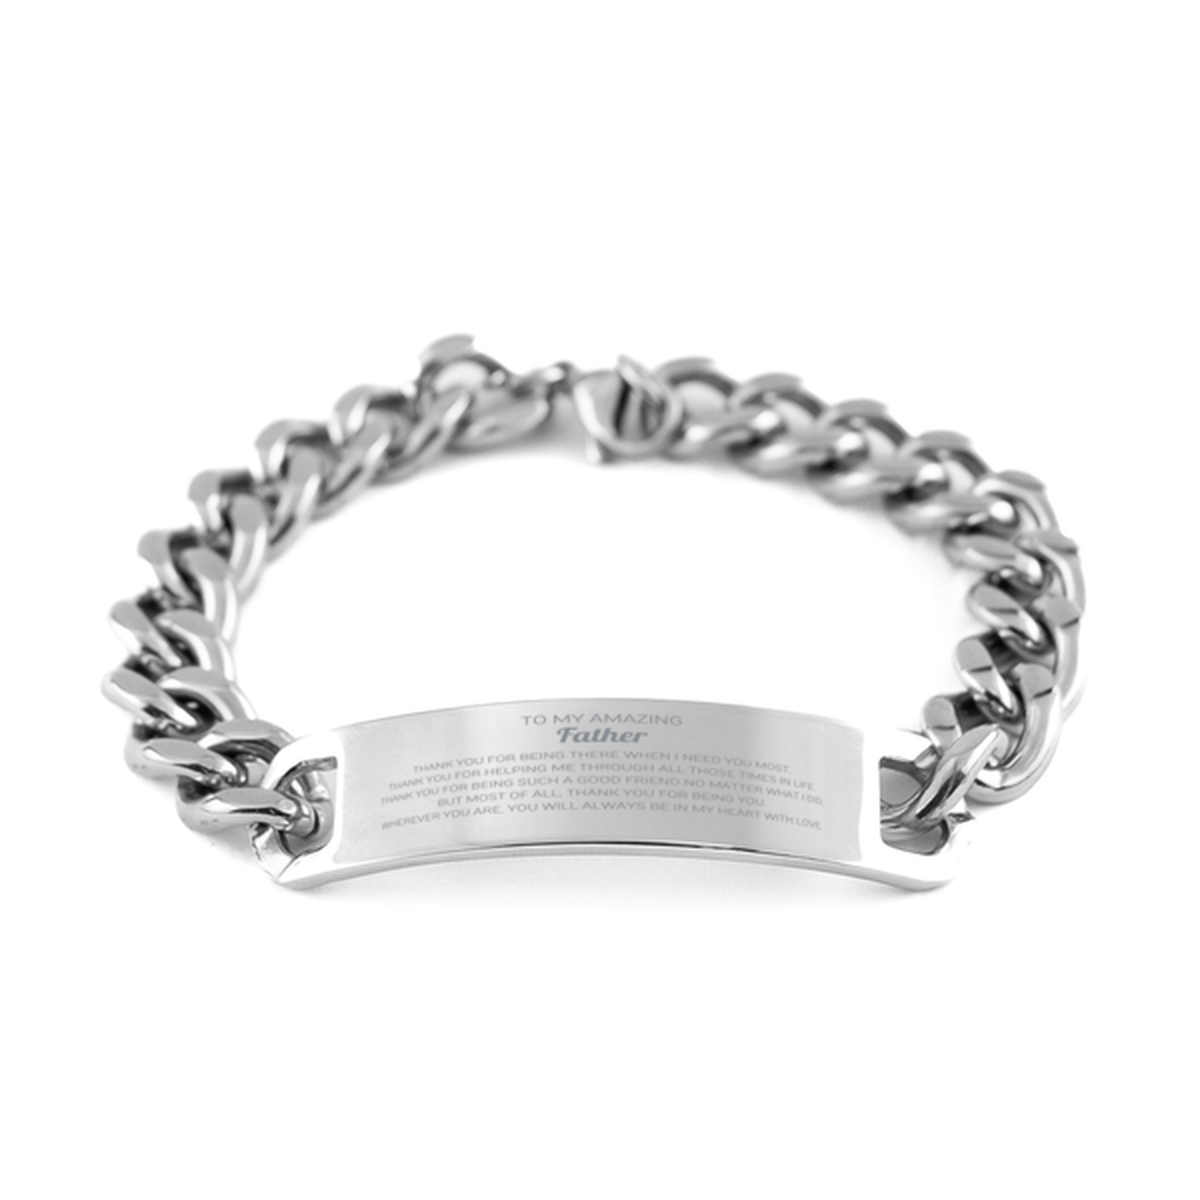 To My Amazing Father Cuban Chain Stainless Steel Bracelet, Thank you for being there, Thank You Gifts For Father, Birthday, Christmas Unique Gifts For Father